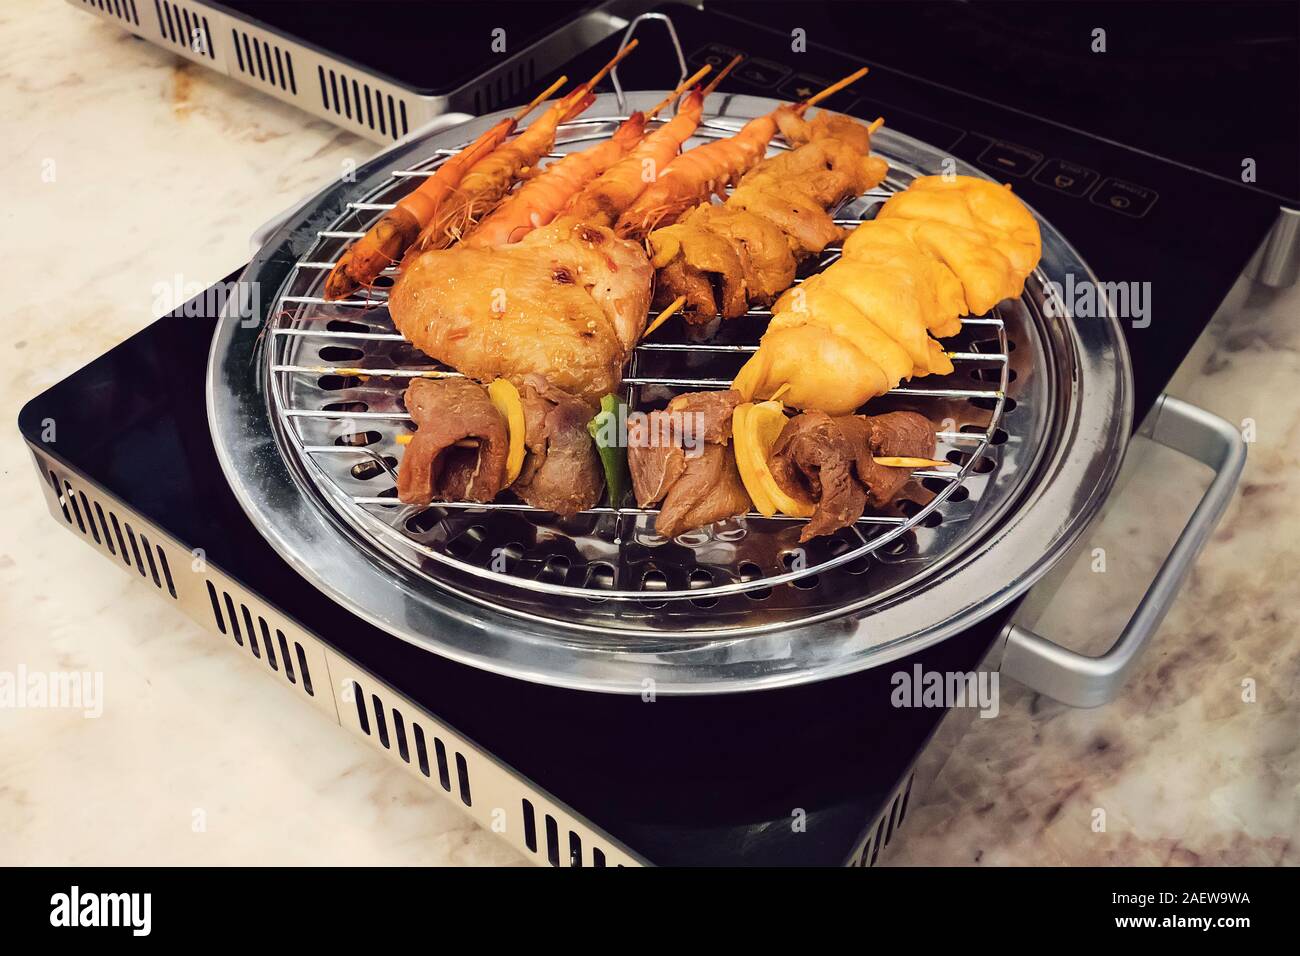 Barbecue grill In the electric stove. cooking fried food on a modern electronic  grill Stock Photo - Alamy